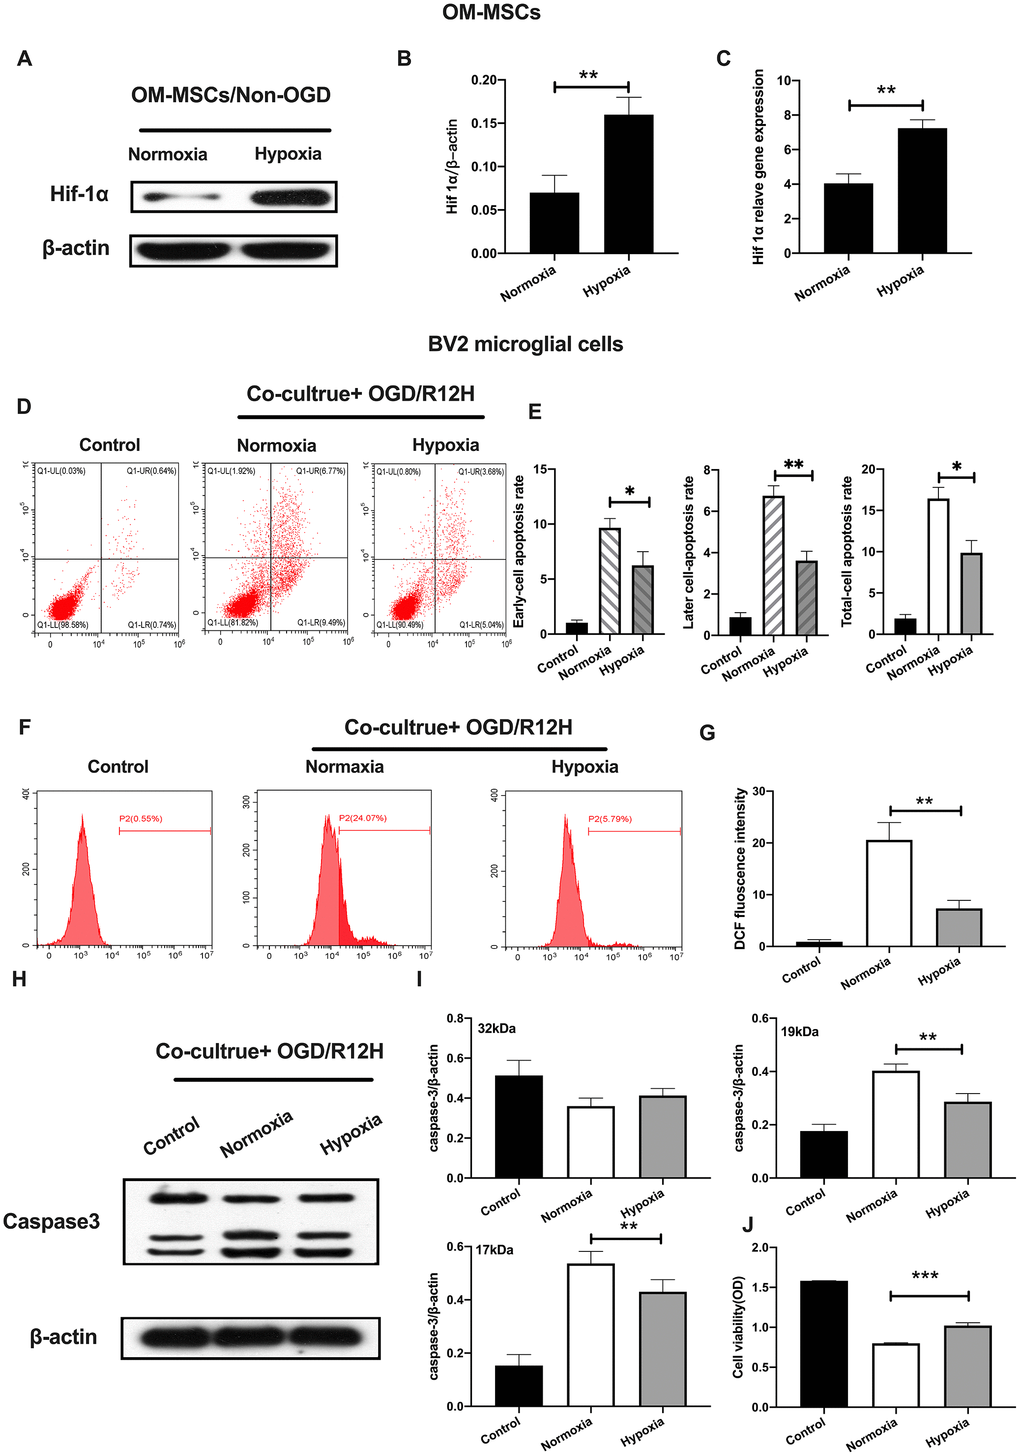 Hypoxia-preconditioned OM-MSCs prevented cerebral OGD/R-induced apoptosis in BV2 microglial cells. (A–C) Protein and mRNA expression of HIF-1α in OM-MSCs as determined by western-blot and qPCR, respectively. (D–E) The apoptosis rate of BV2 microglial cells as evaluated by flow cytometry with Annexin V/PI staining. (F, G) ROS generation in BV2 microglial cells as measured by flow cytometry. (H, I) The expression of caspase3 in BV2 microglial cells as determined by Western blotting analysis. (J) The viability of BV2 microglial cells as determined by MTT assay. All data are presented as the mean value ±SD. *p